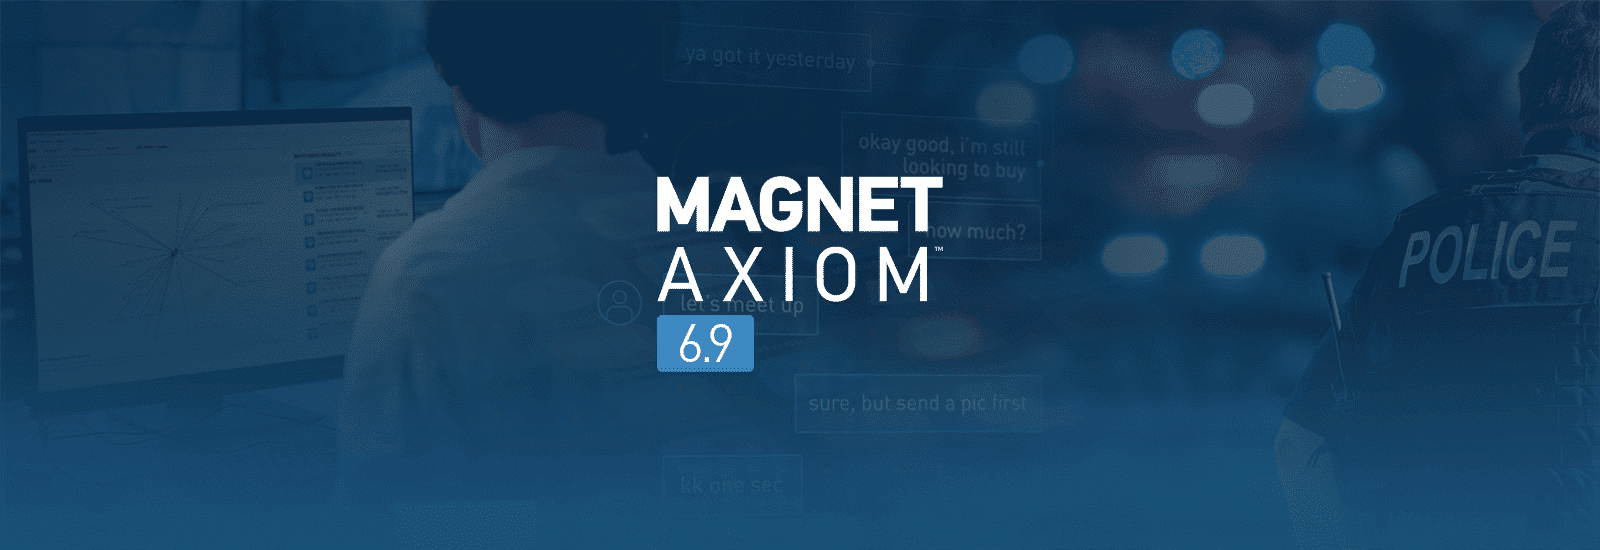 A decorative header for the Magnet AXIOM 6.9 release